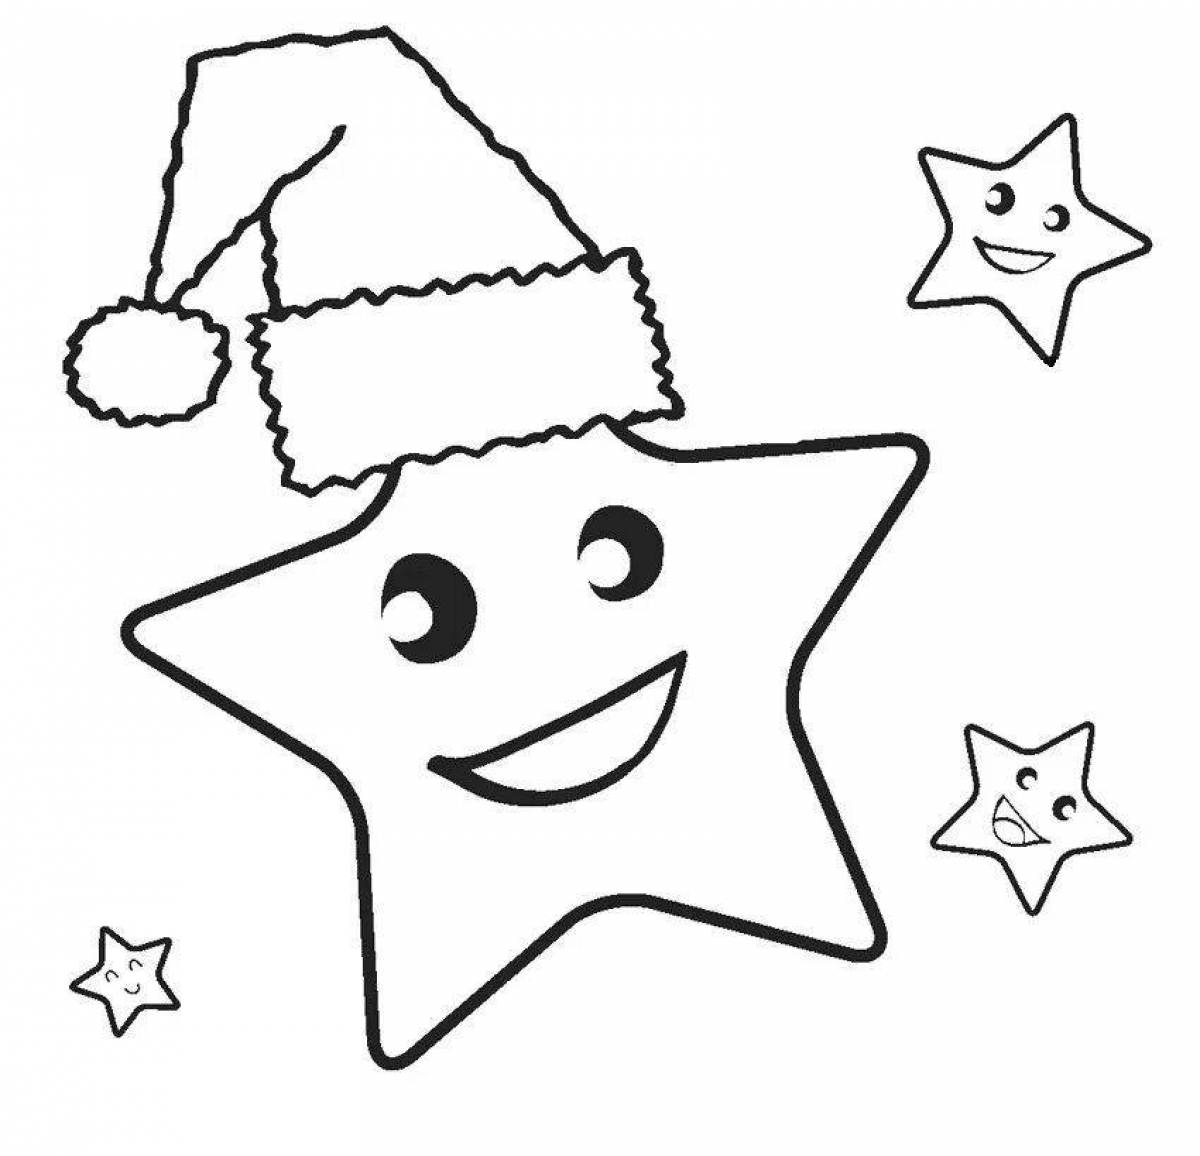 Coloring book merry Christmas star